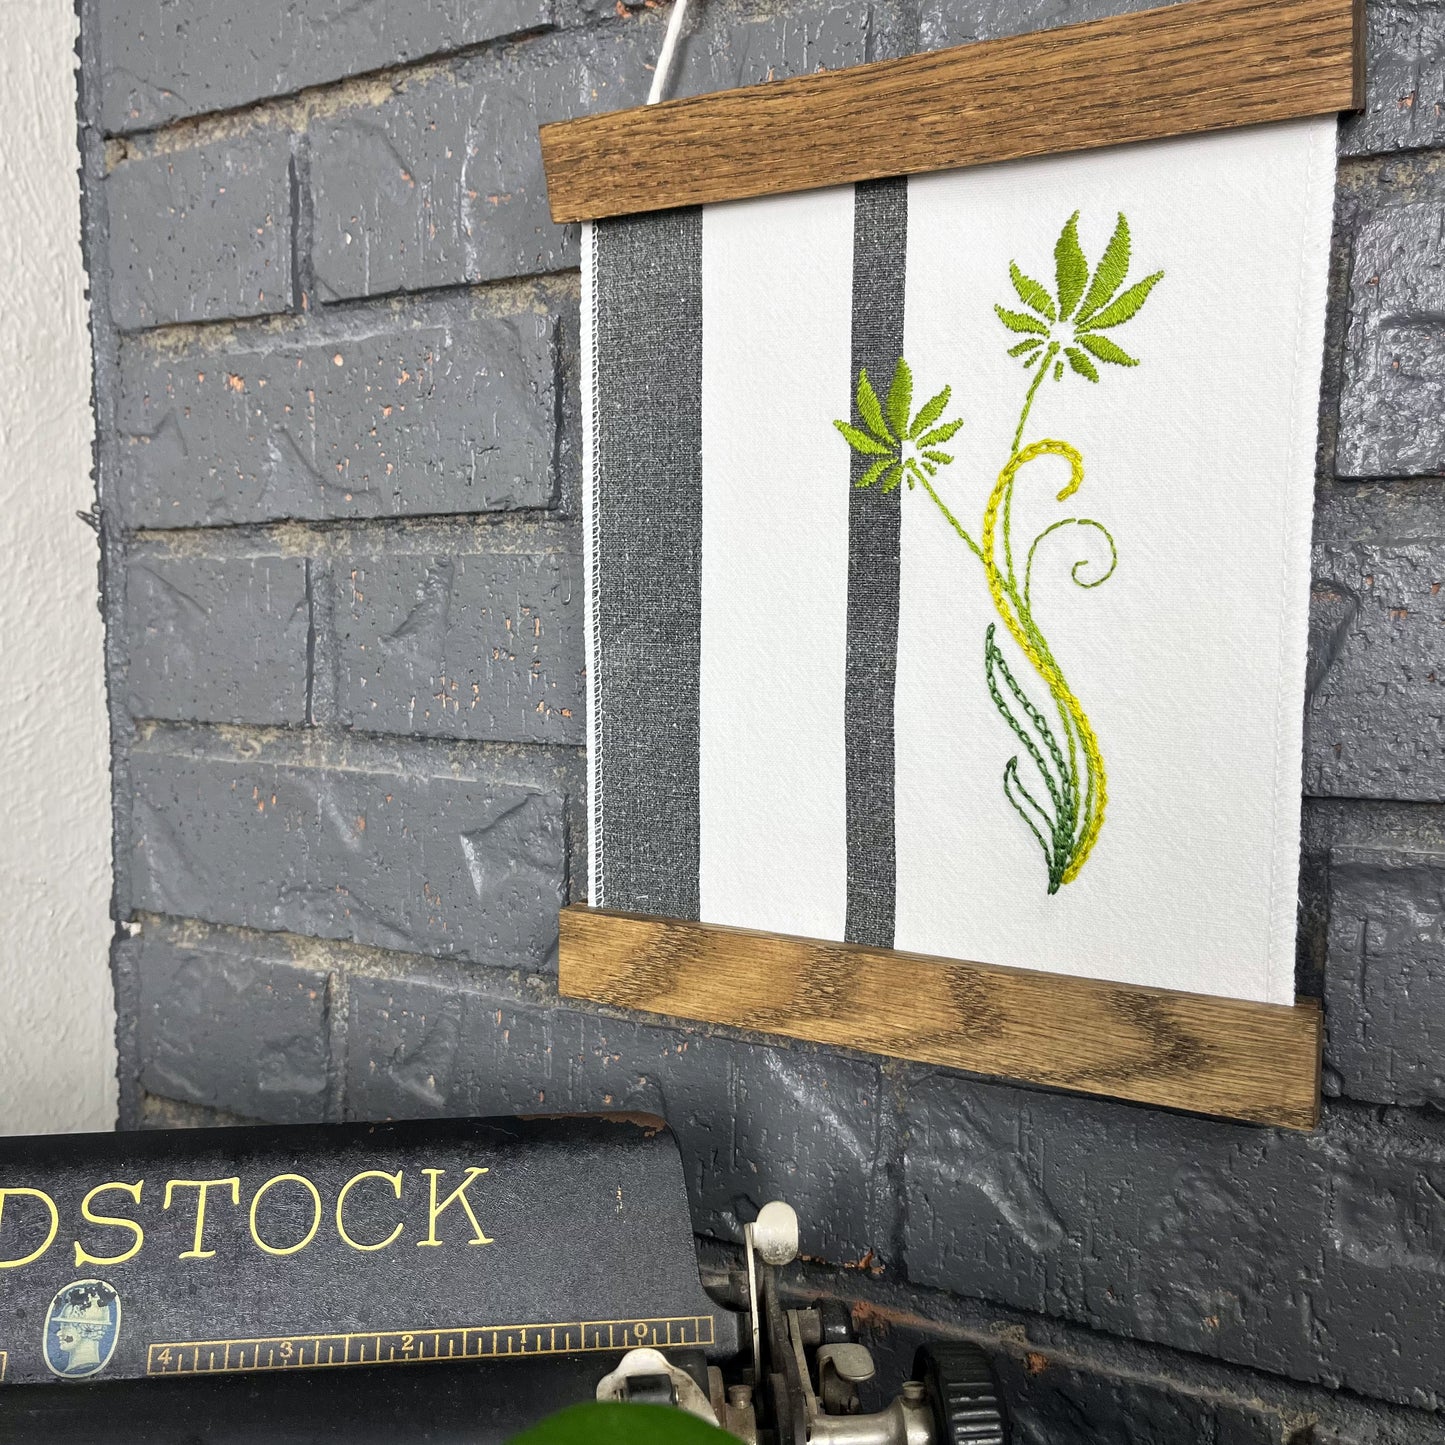 a fabric wall hanging in a wood magnetic frame on a grey wall, made out of white fabric with black vertical stripes, hand stitched with green flowers with long curvy stems, a typewriter and pothos plant peek out at the bottom of the frame